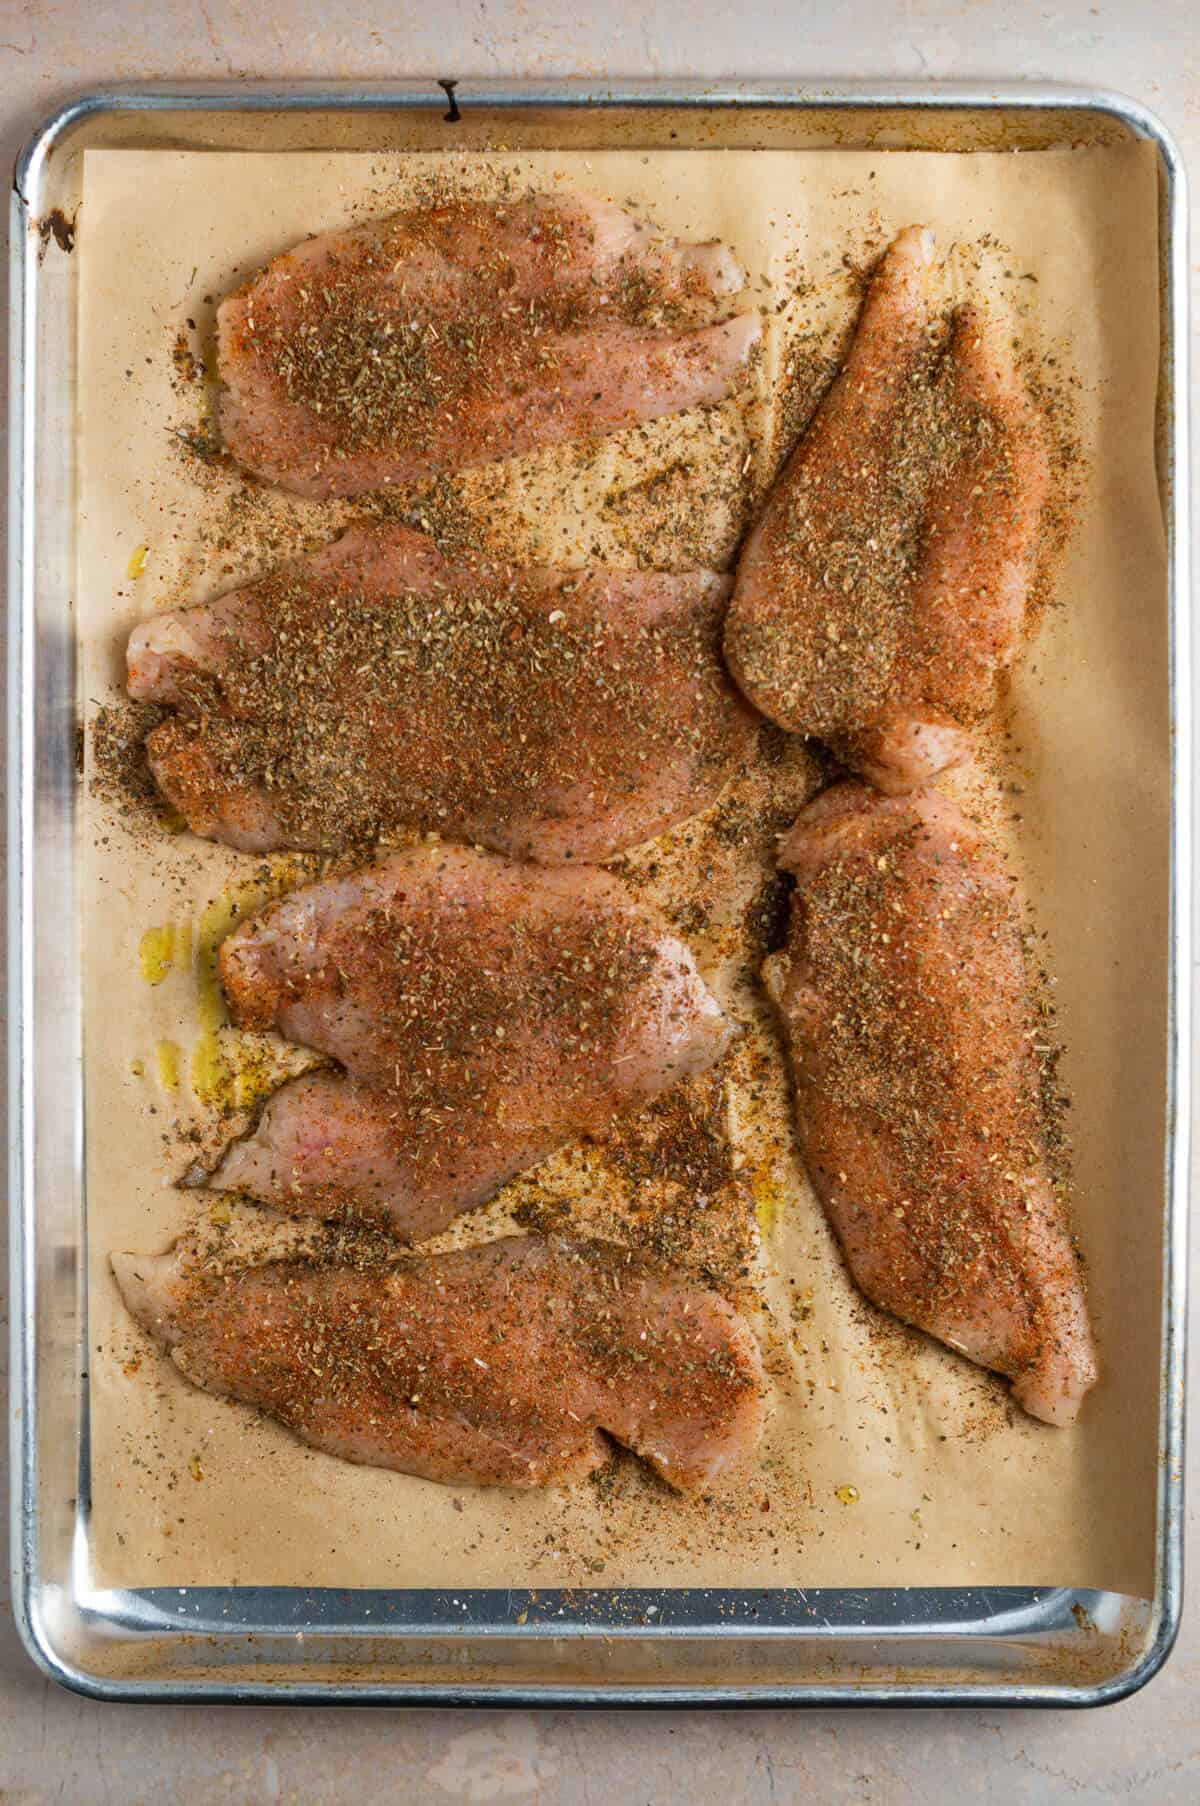 A parchment-lined baking sheet with 6 pieces of chicken breast coated in the herb mixture.